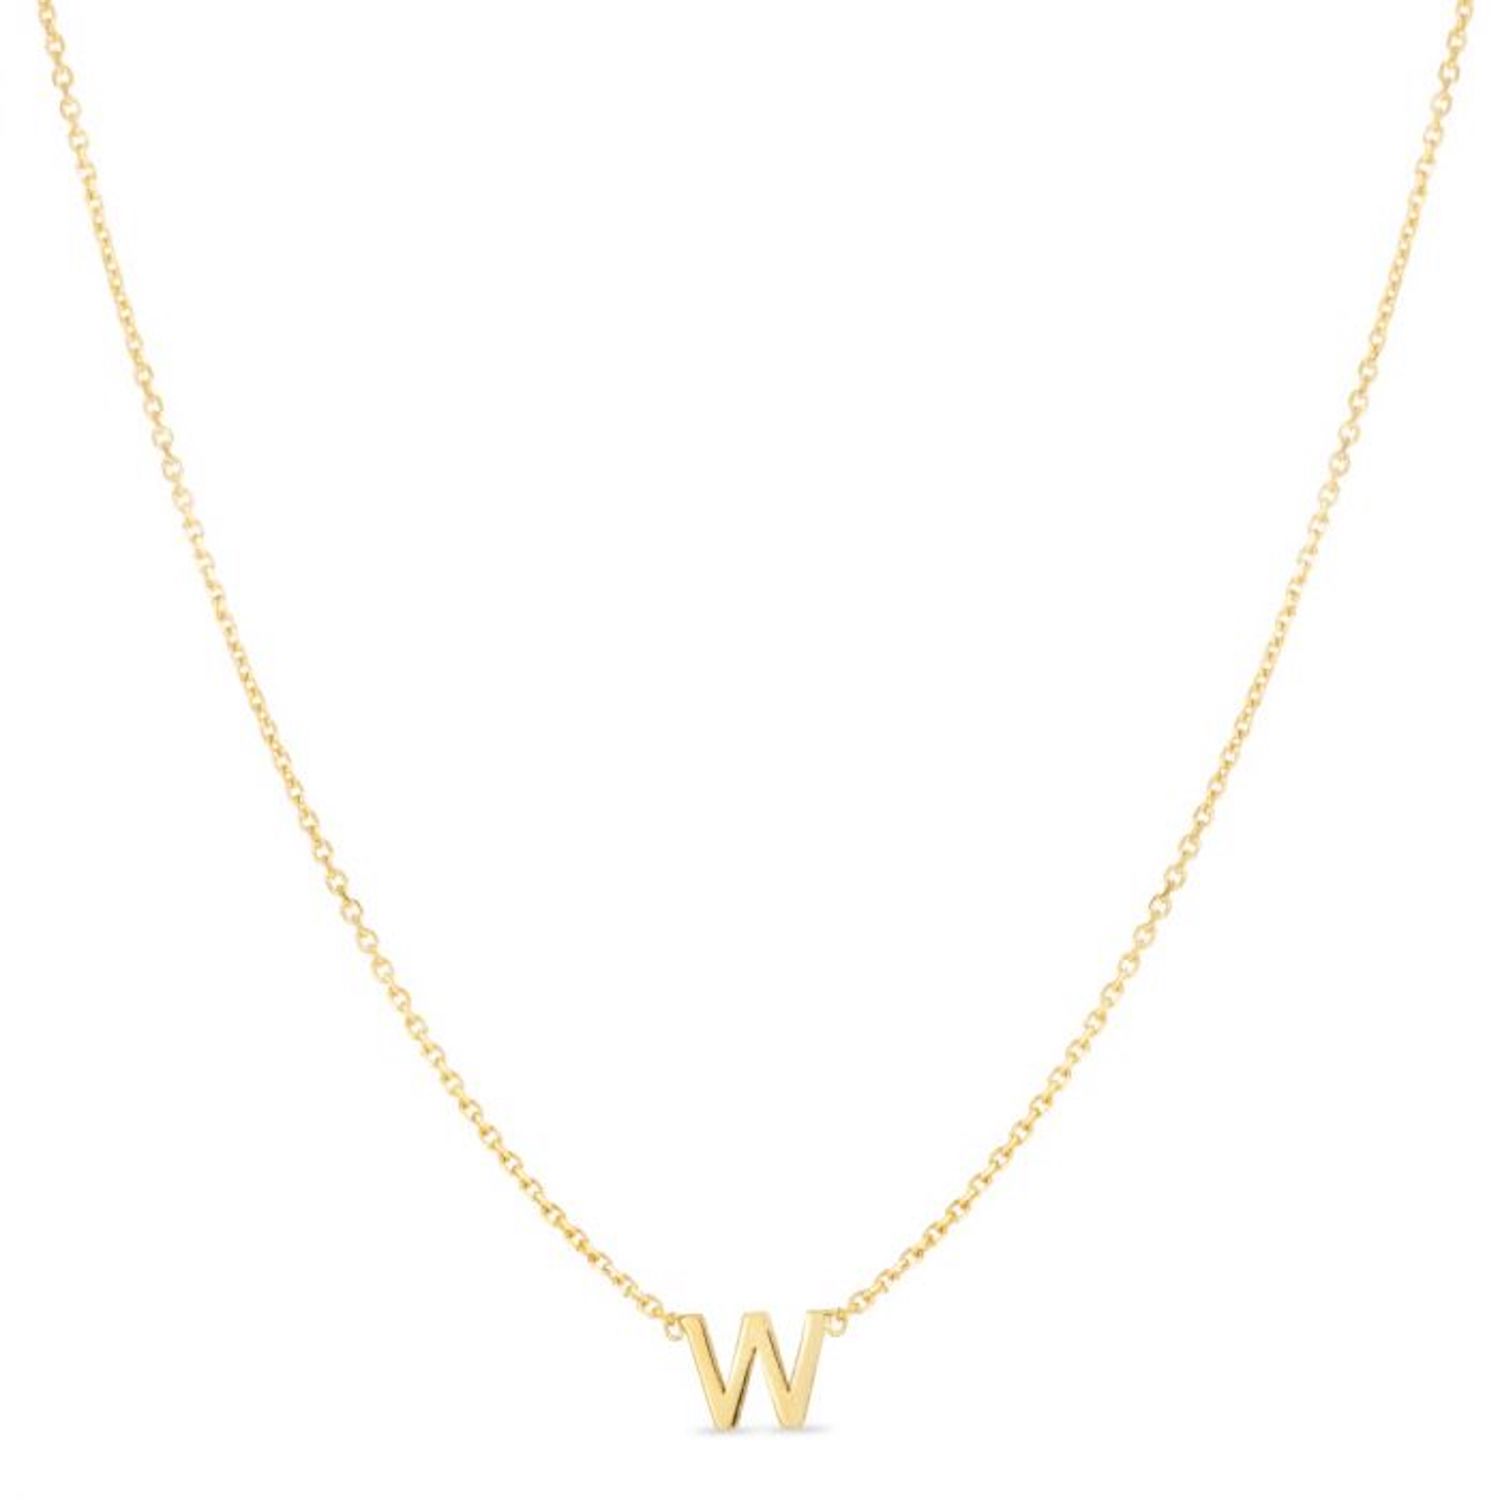 14K Yellow Gold Letter Initials Pendant Necklace 16"-18" - W